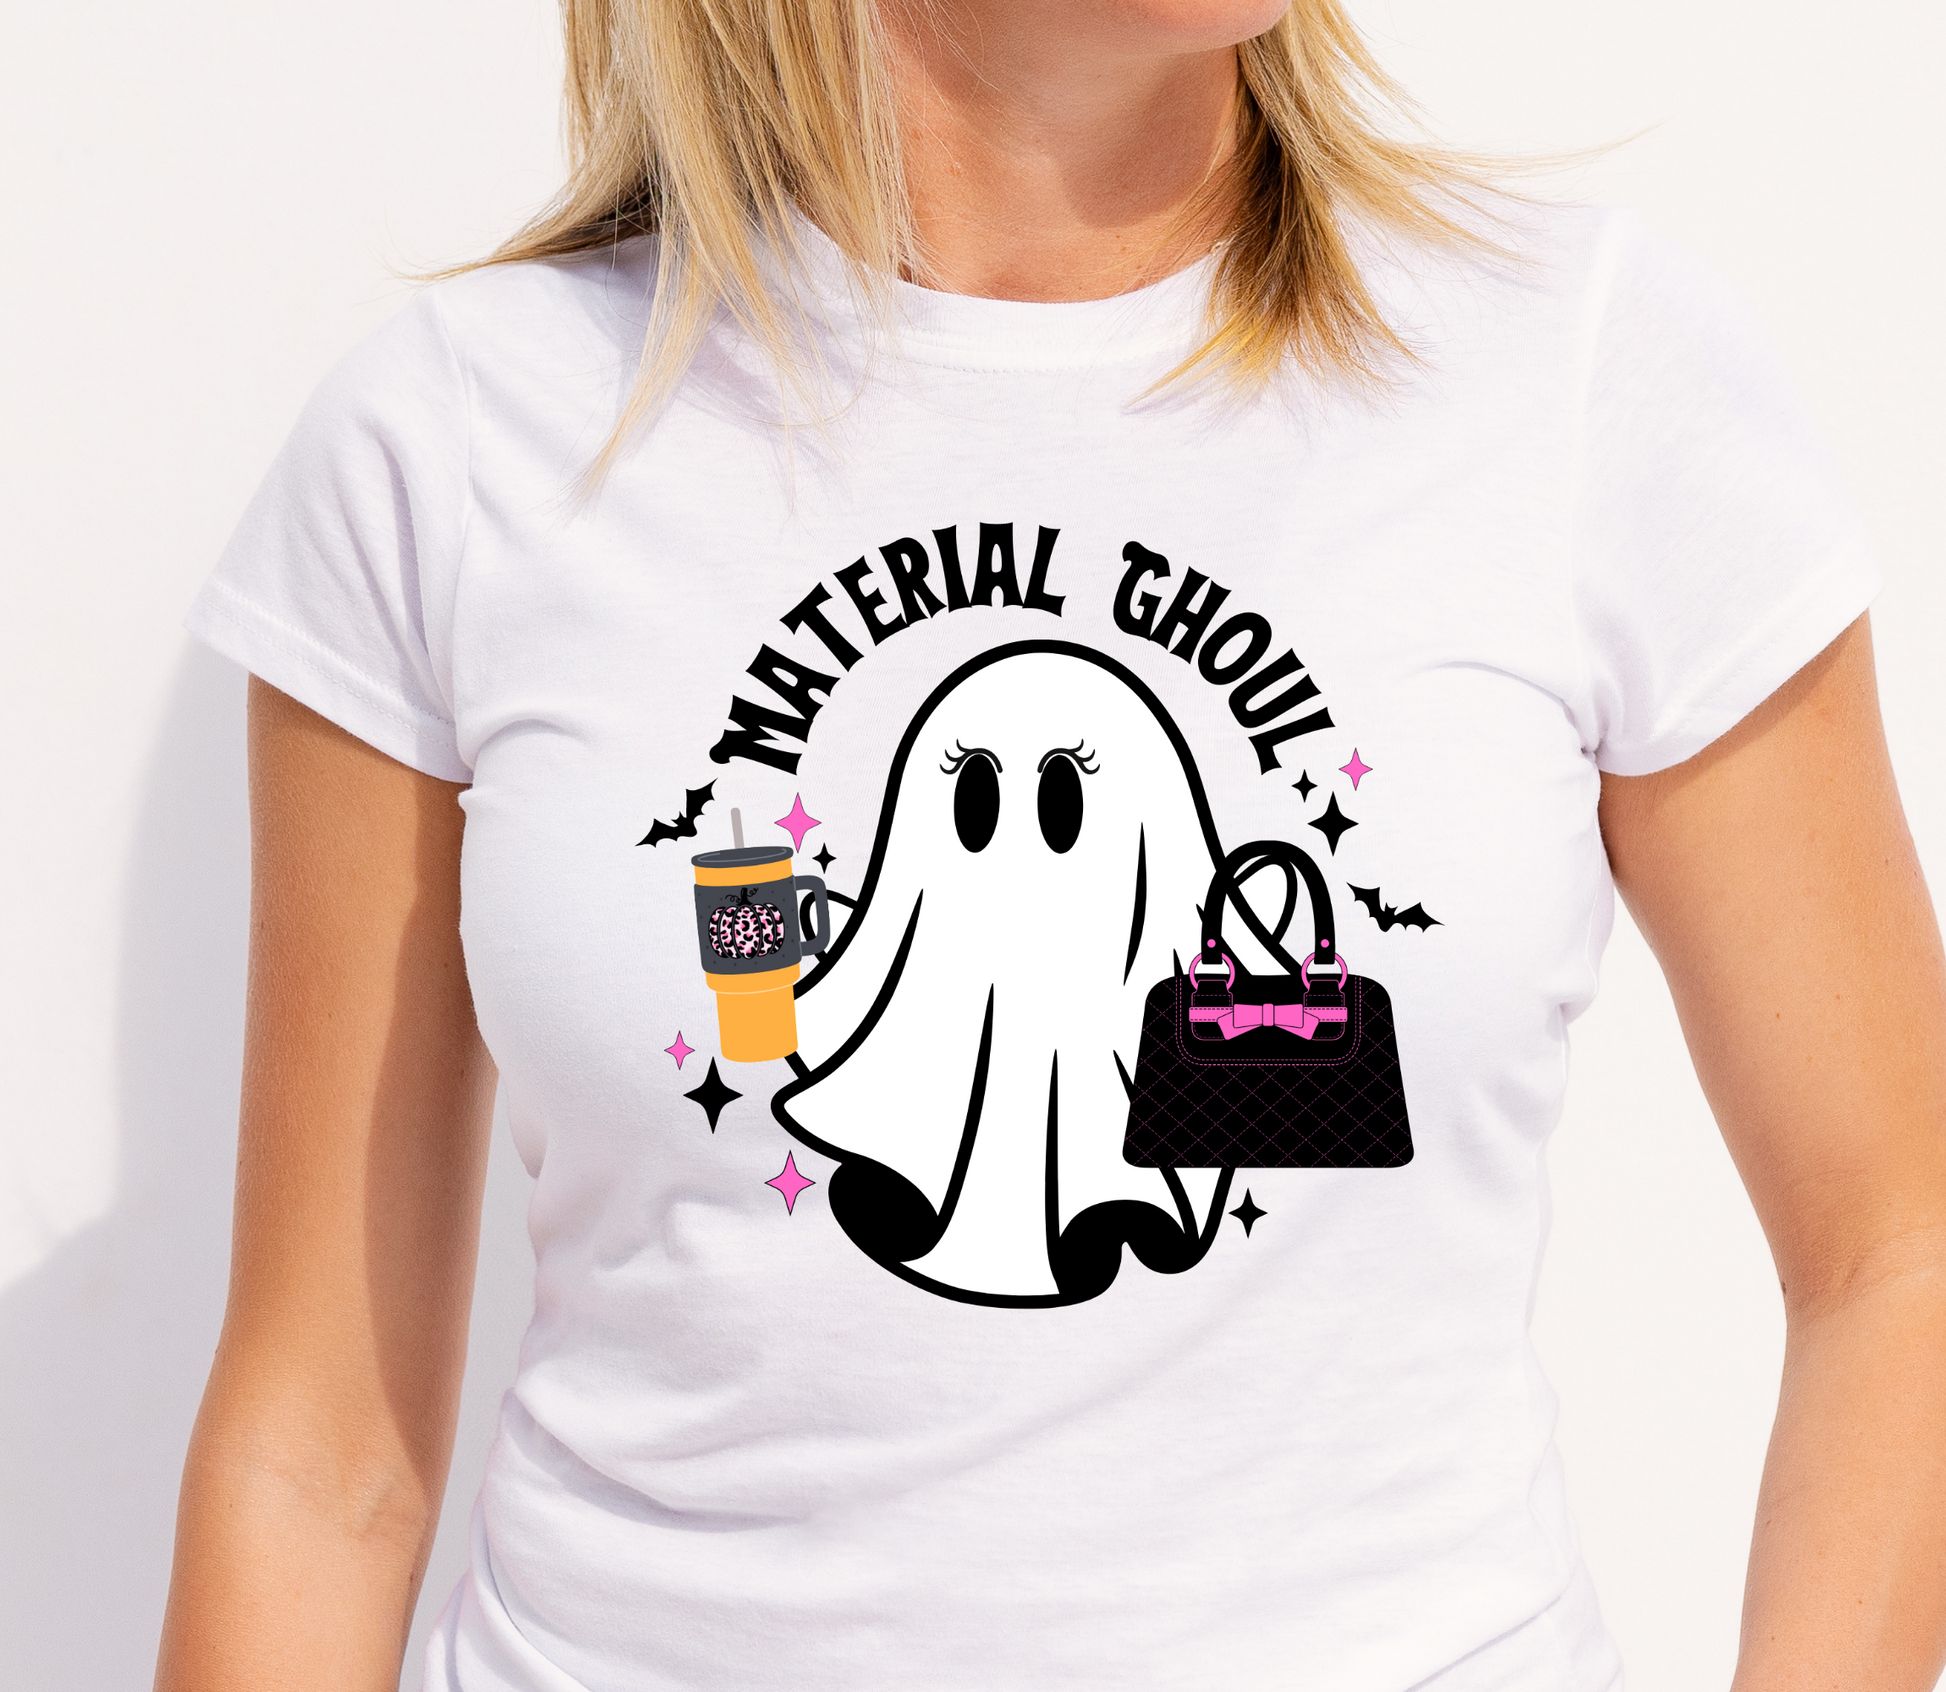 Close-up of model in white shirt showcasing chic ghost with handbag DTF design.